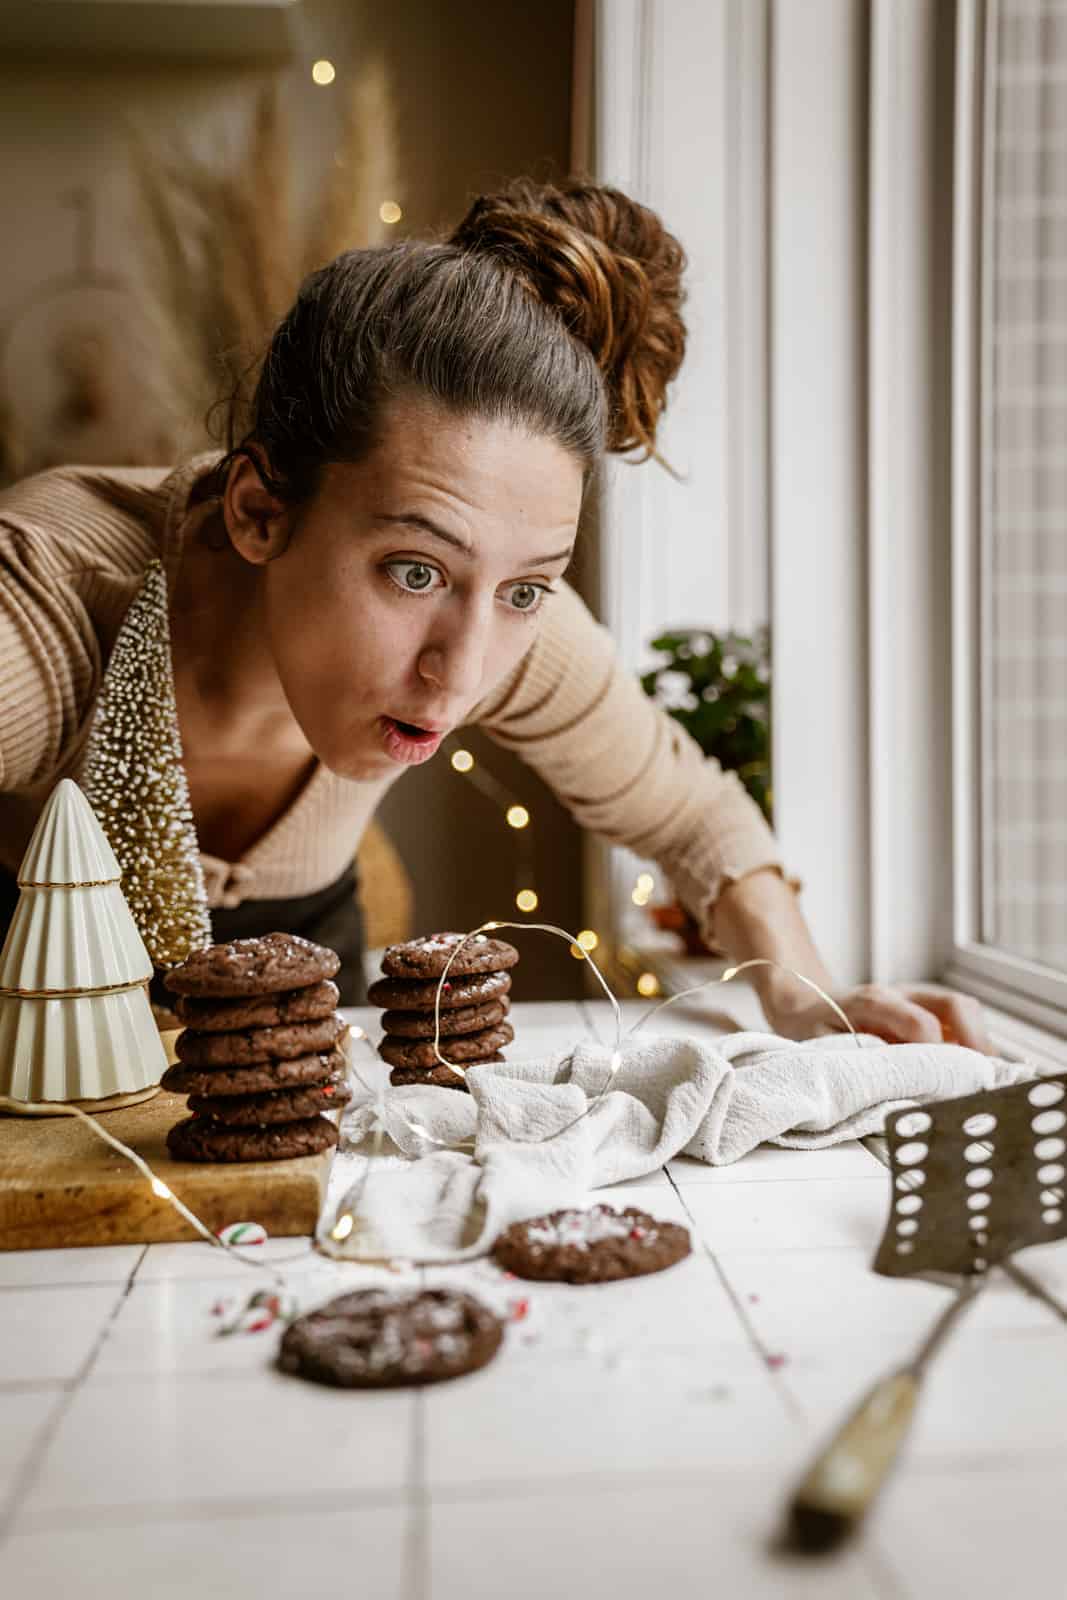 Maria's sister looking at Chocolate Peppermint Cookies on countertop.